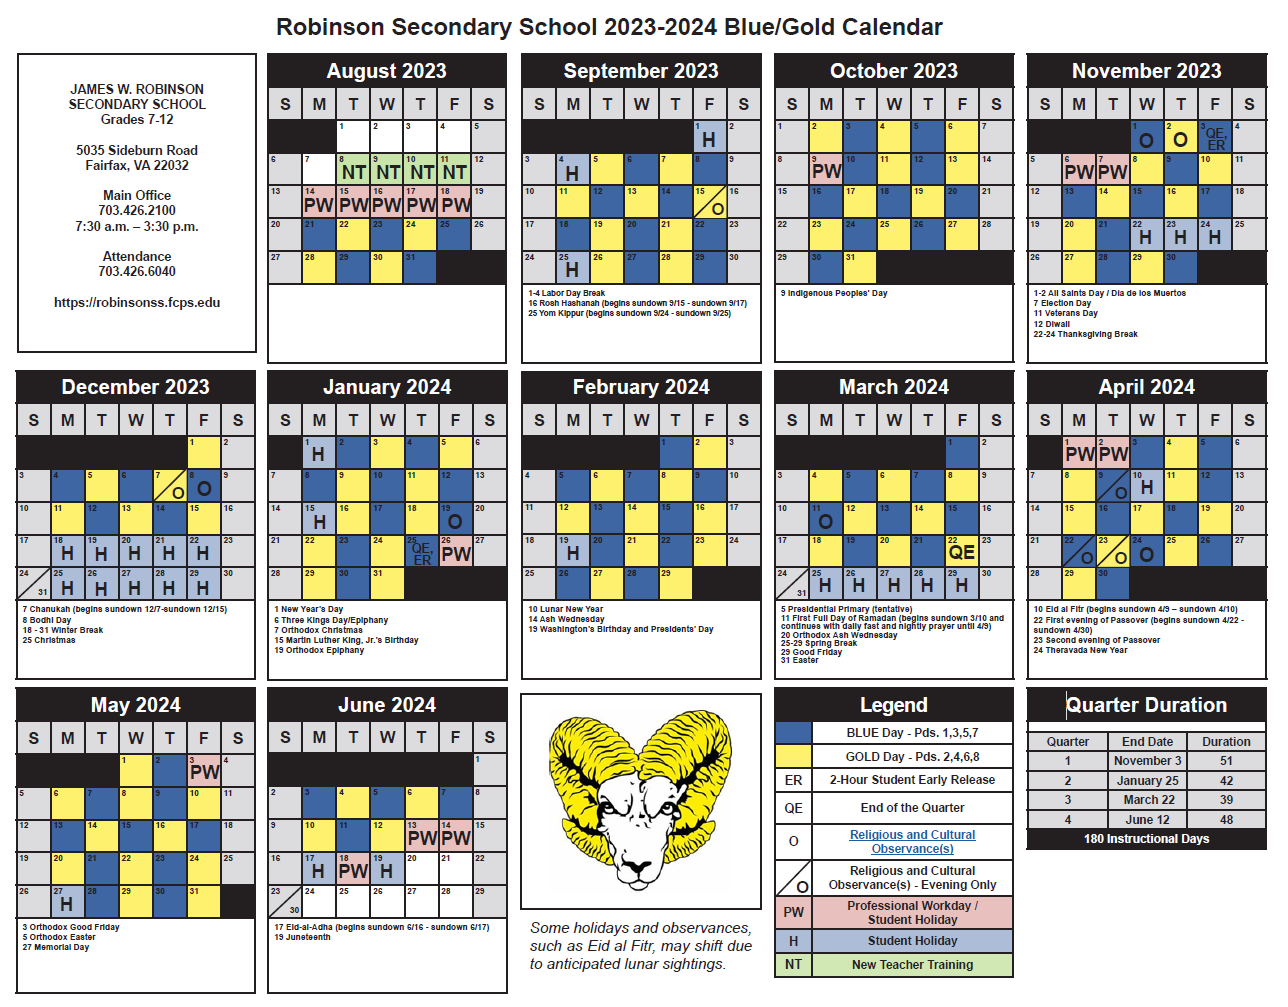 Calendar and Bell Schedules | James W. Robinson Secondary School